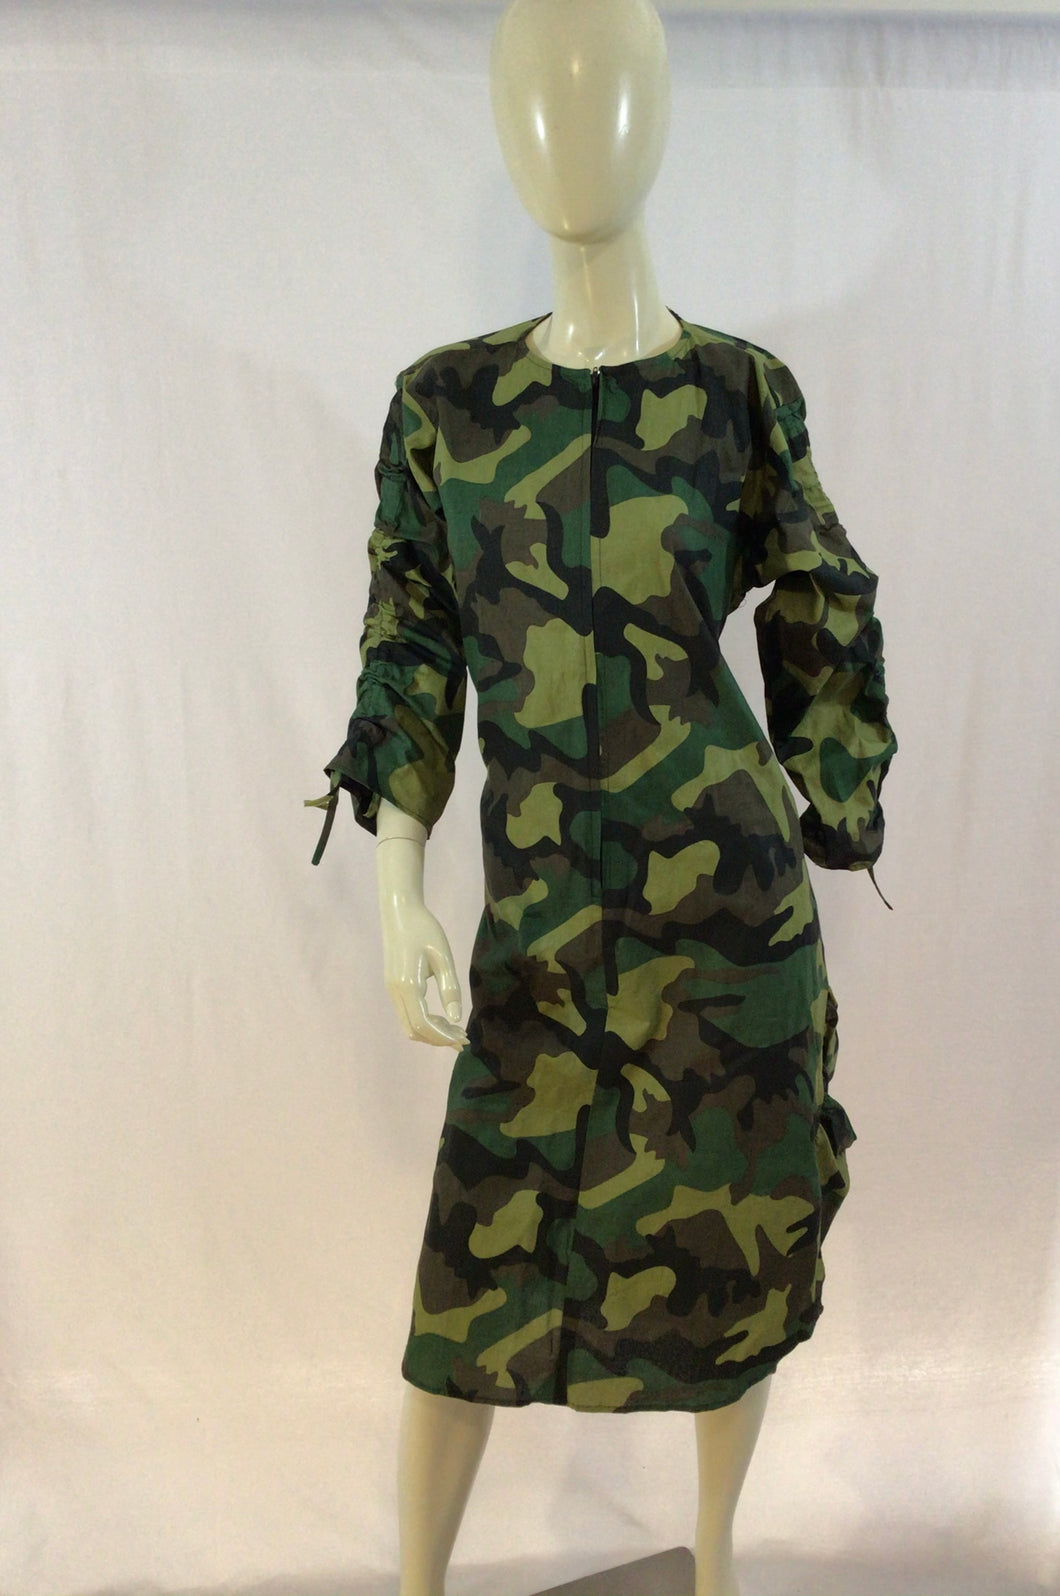 Camo Dress Gathered Sleeves and Sides